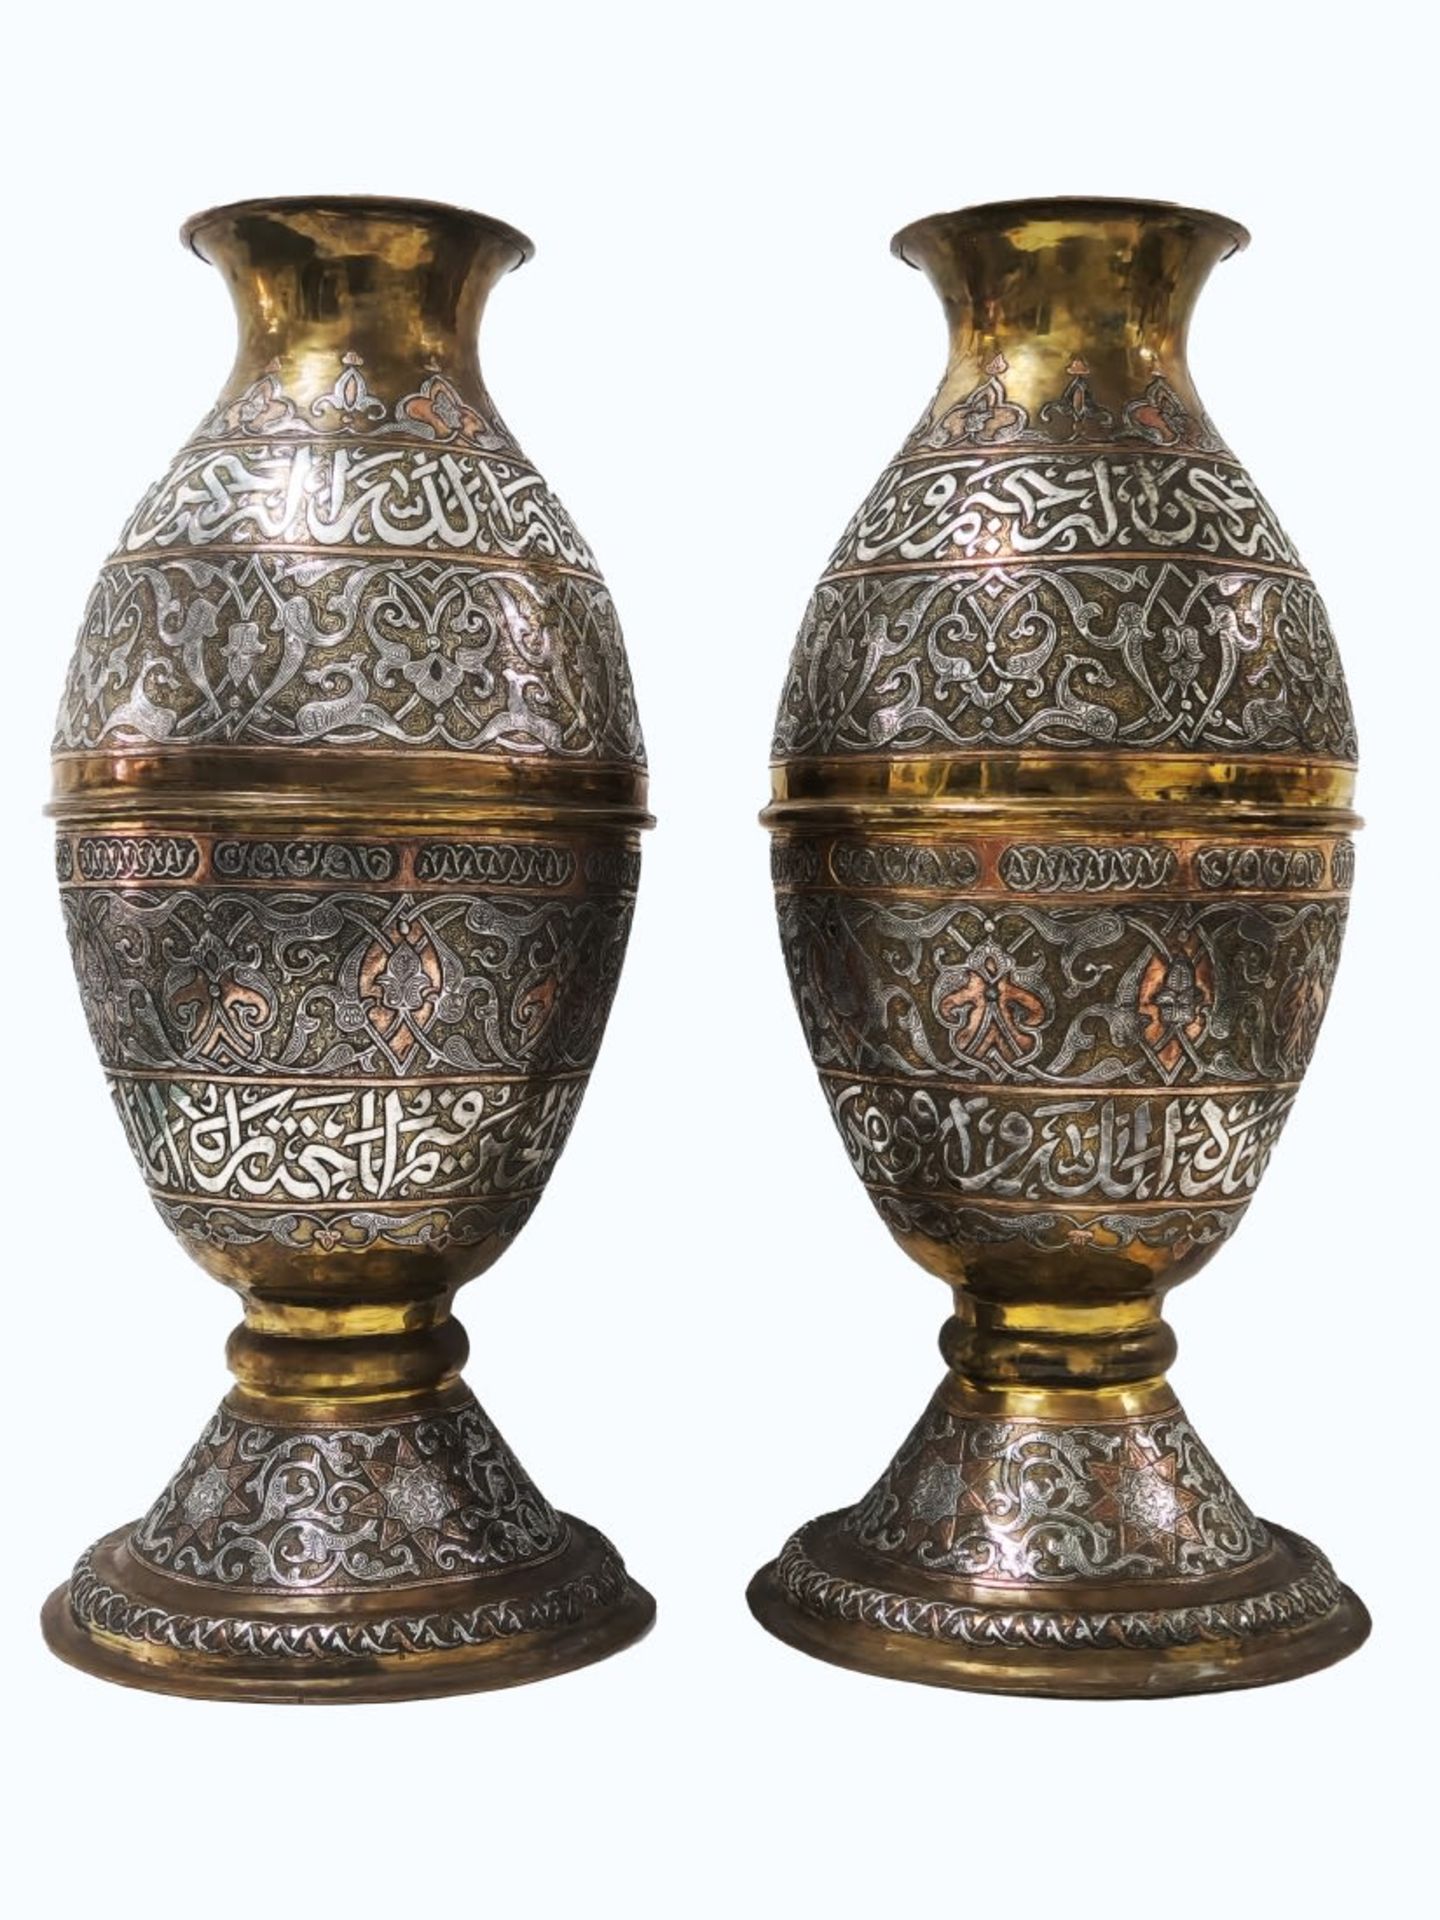 A pair of Islamic vases, impressive and high-quality decorative, made in Damascene Work, (inlay of